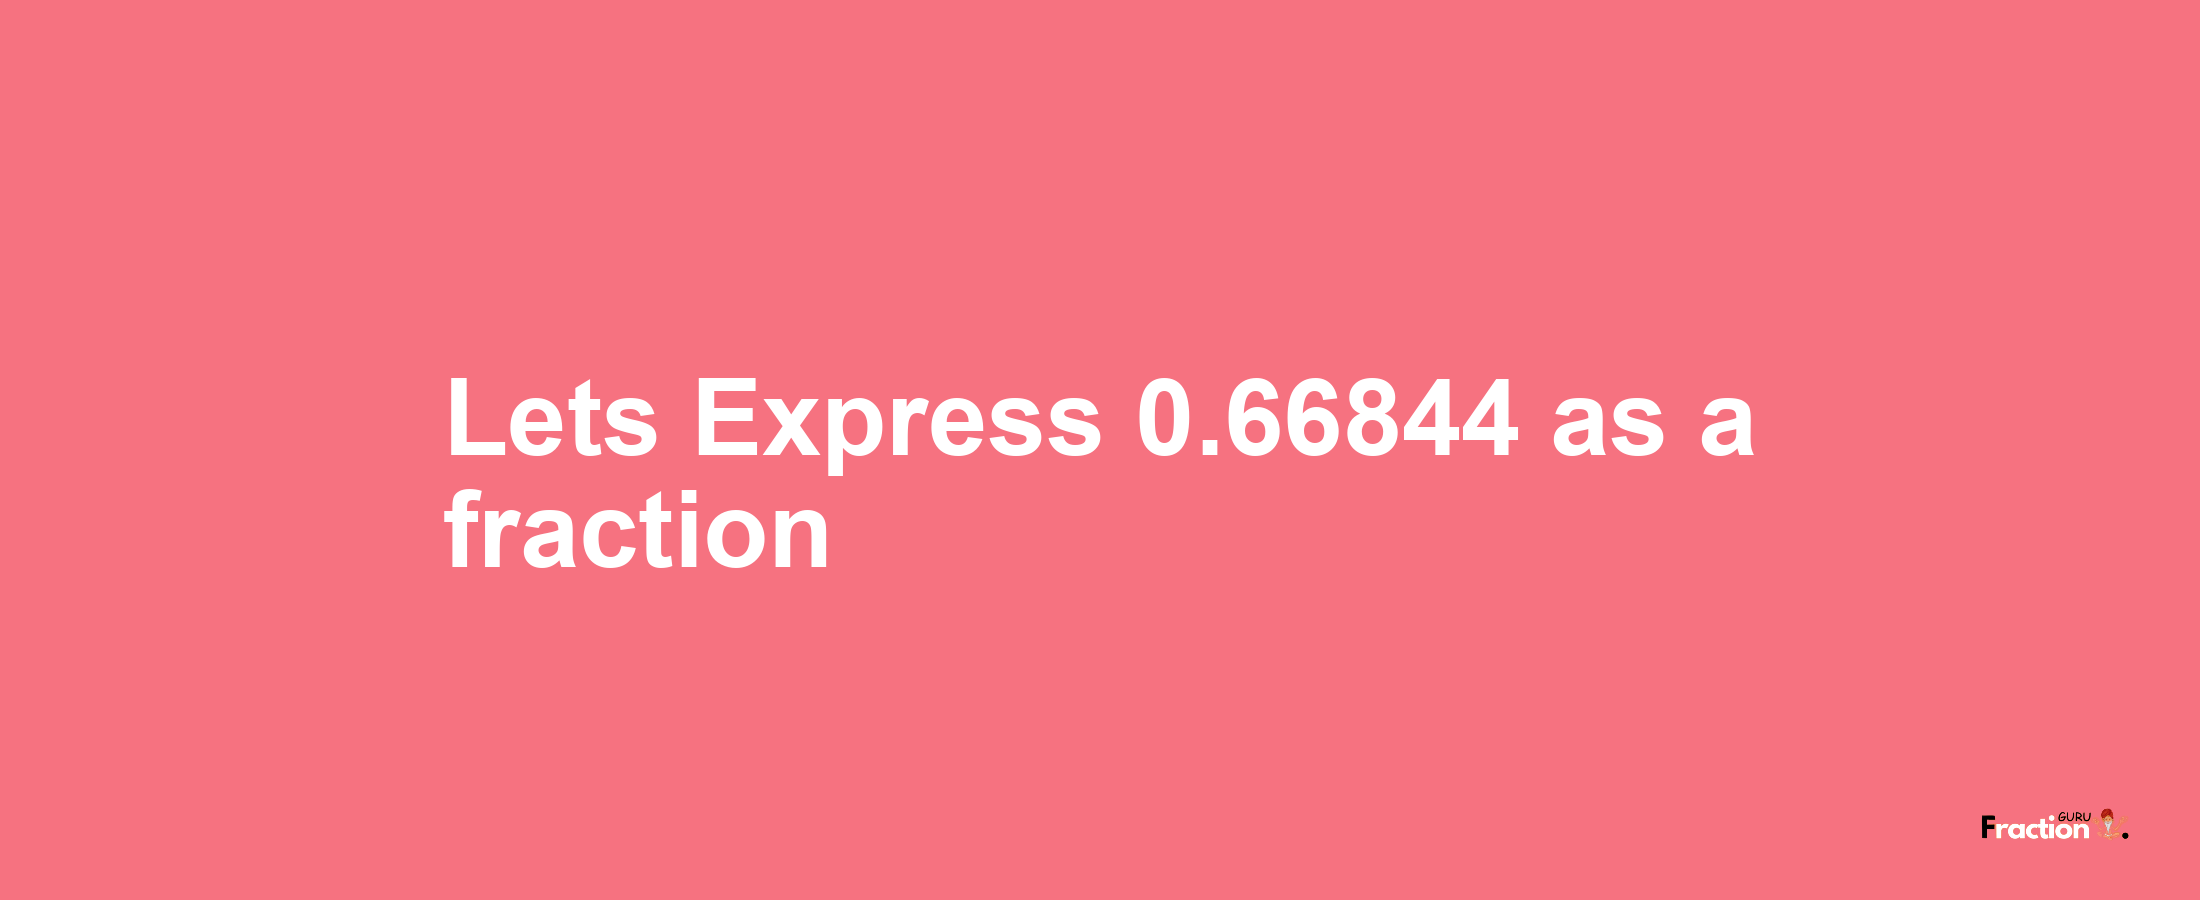 Lets Express 0.66844 as afraction